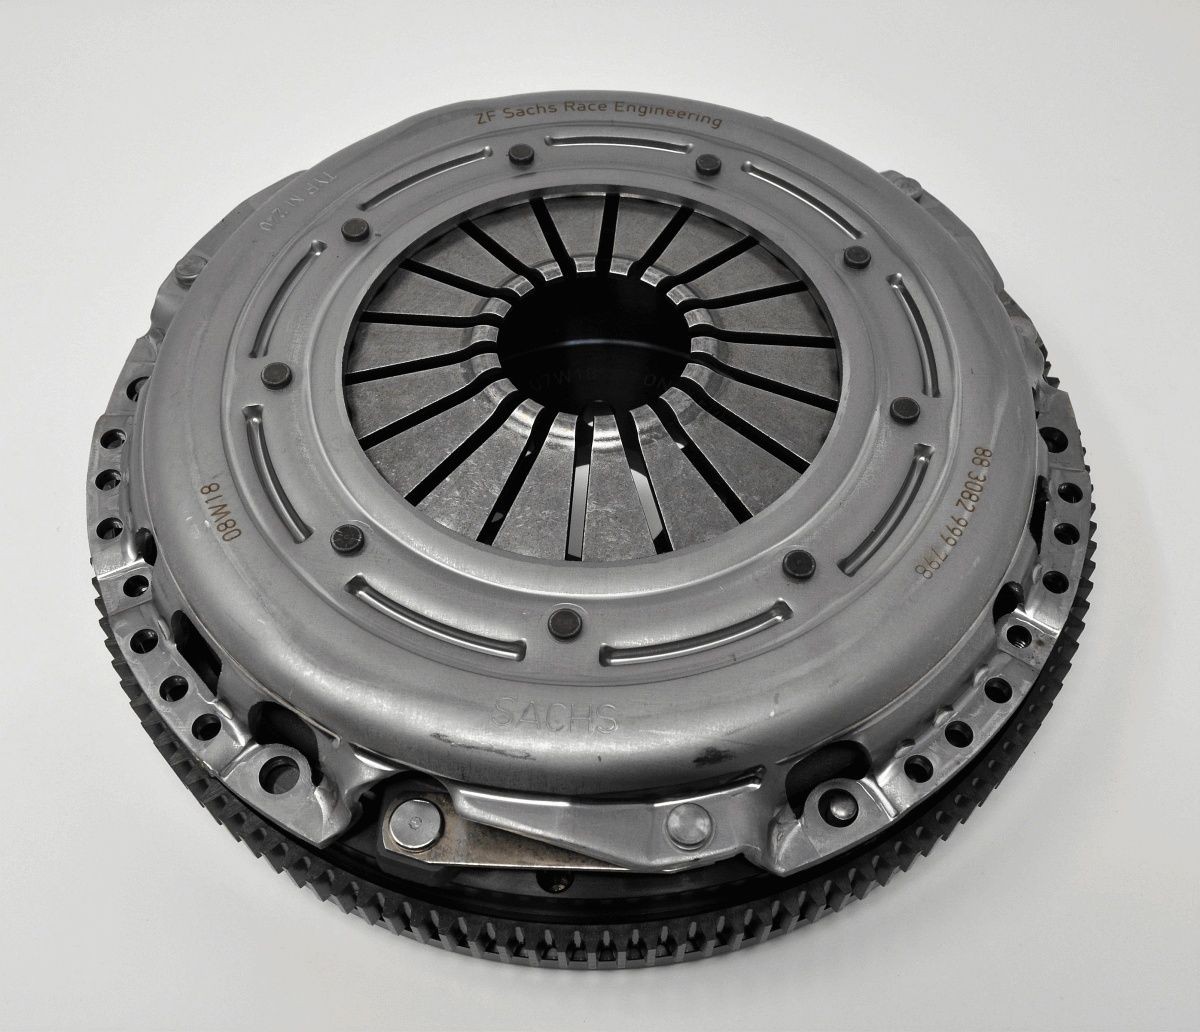 883089 000127 SACHS PERFORMANCE Clutch set SKODA with clutch pressure plate, with single-mass flywheel, with pressure plate screws, for use in motor sport, without clutch release bearing, with clutch disc, 240mm